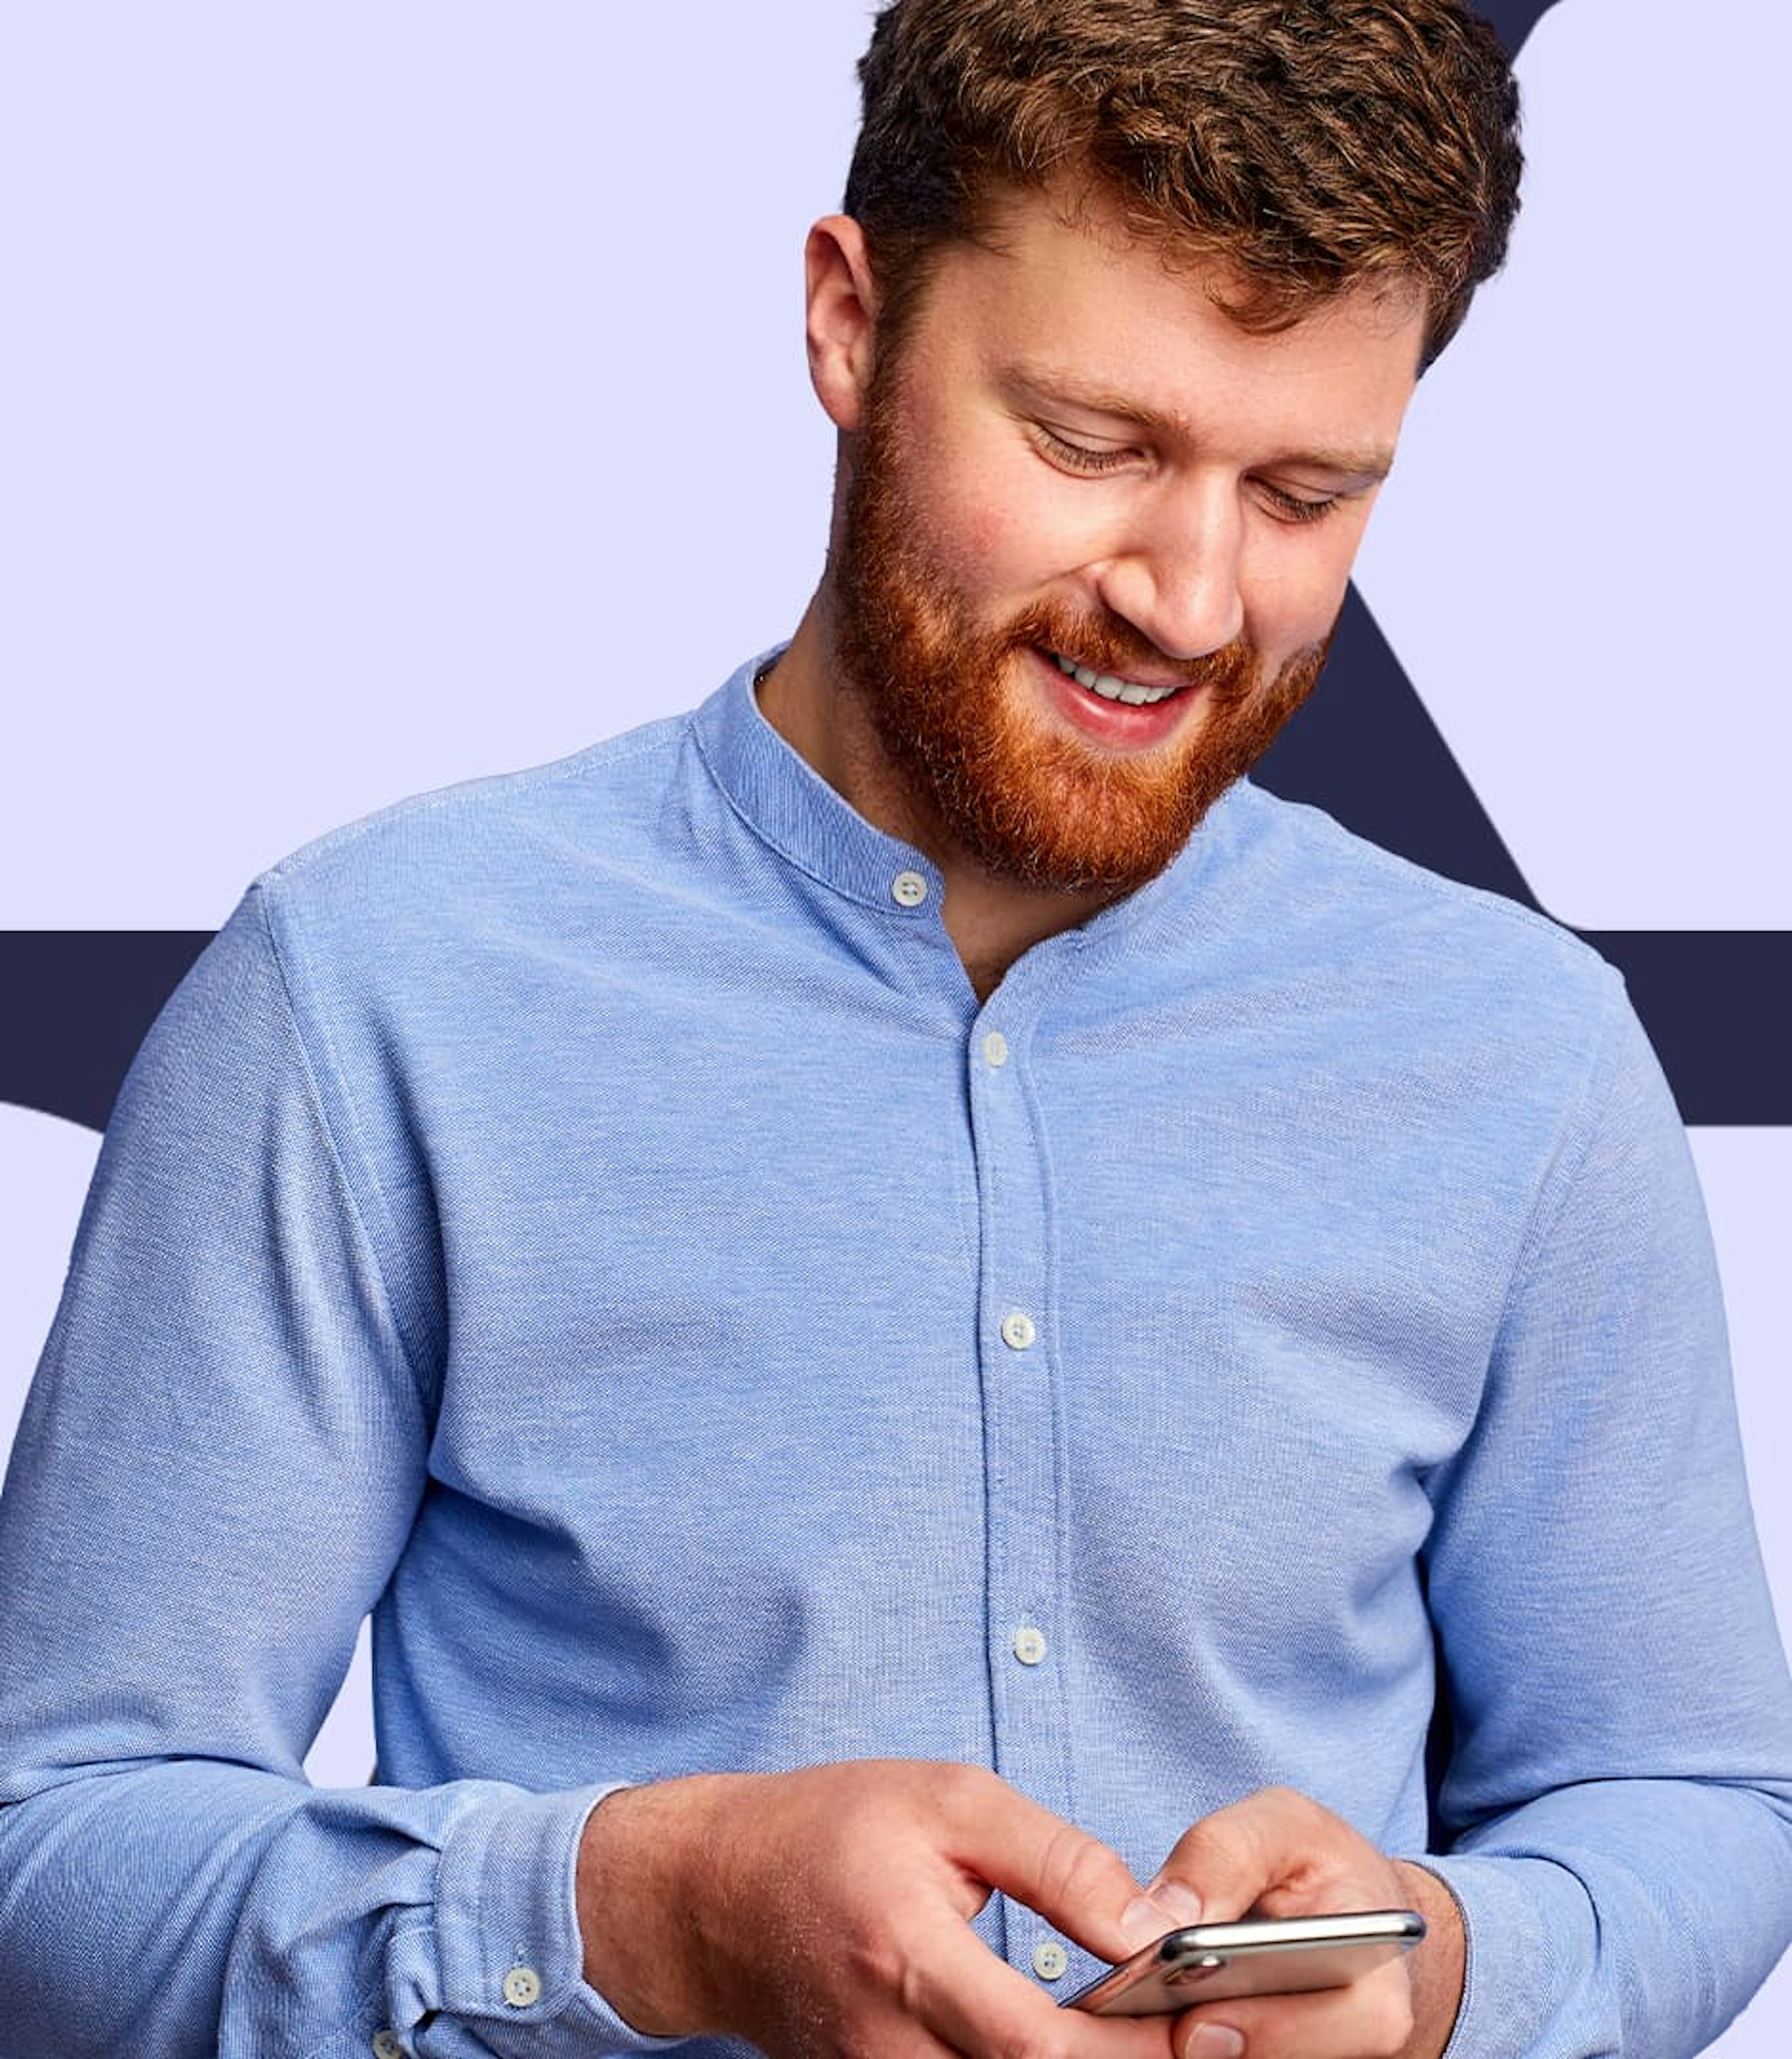 A man wearing a blue shirt looking down at his cellphone.